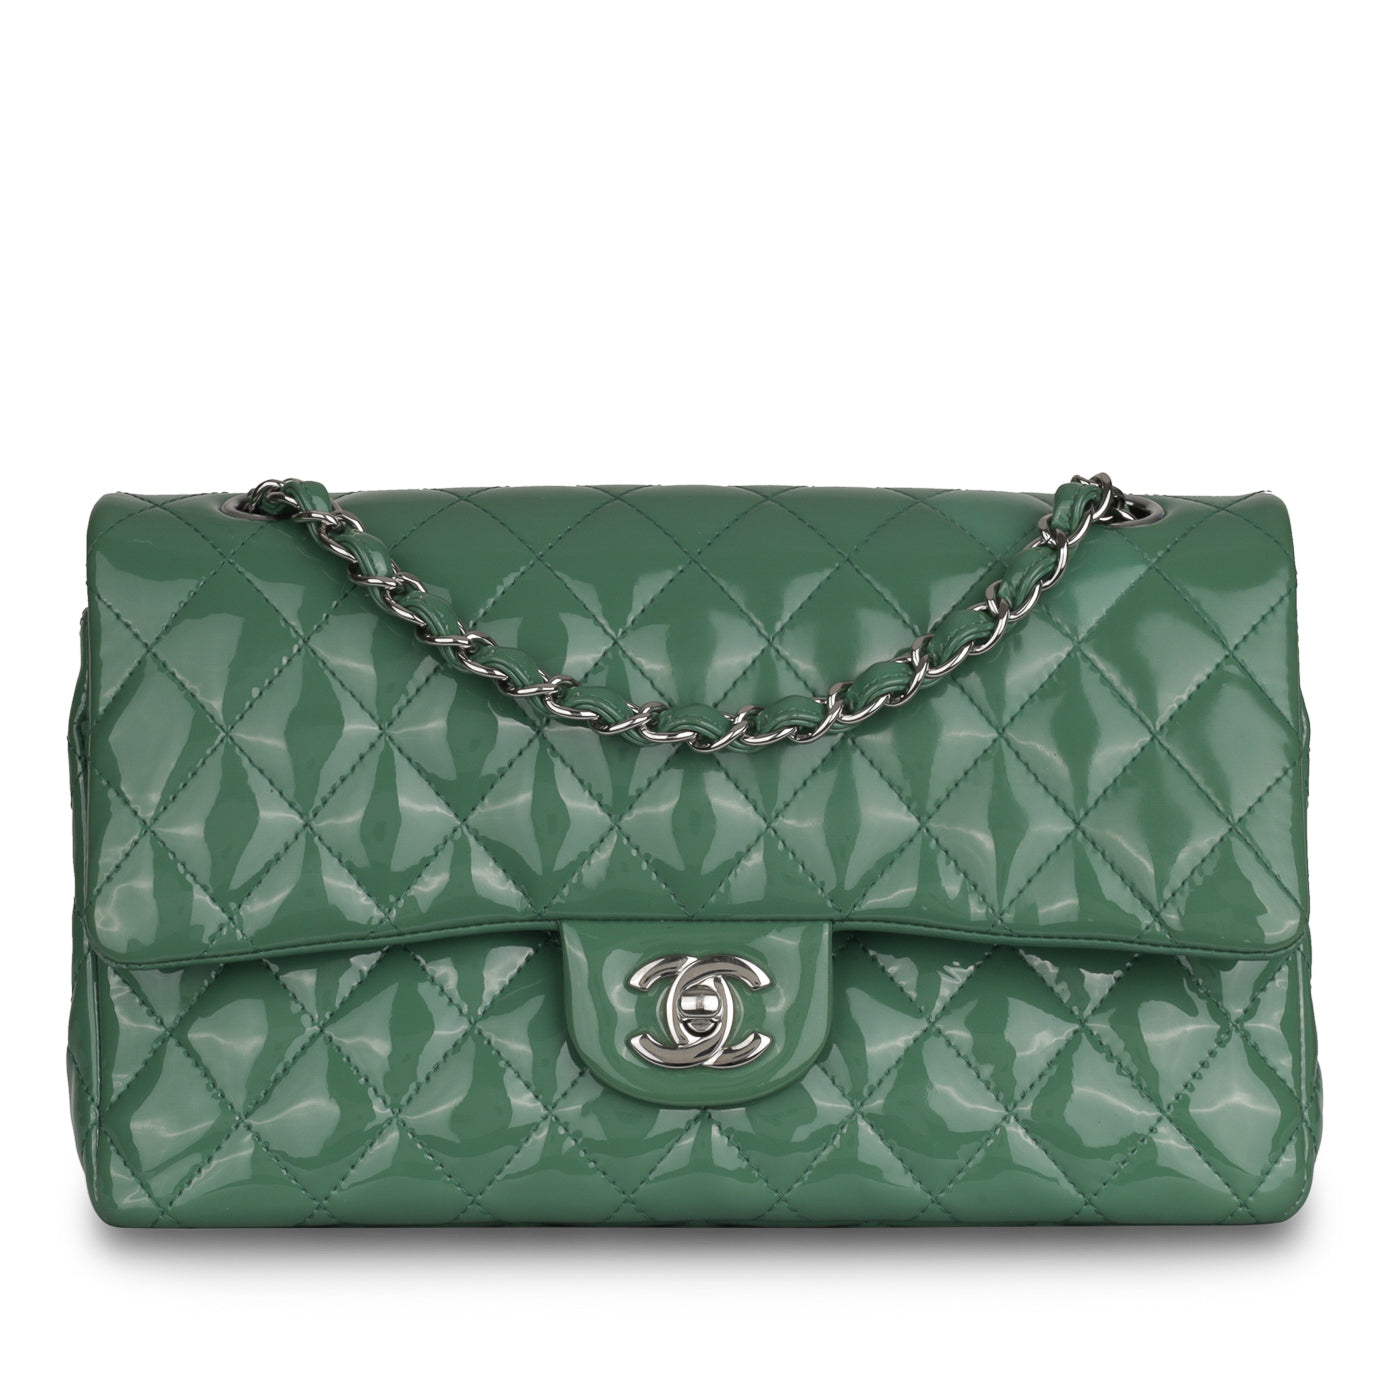 Chanel - Medium Classic Flap Bag - Green Patent Leather - SHW - Pre ...